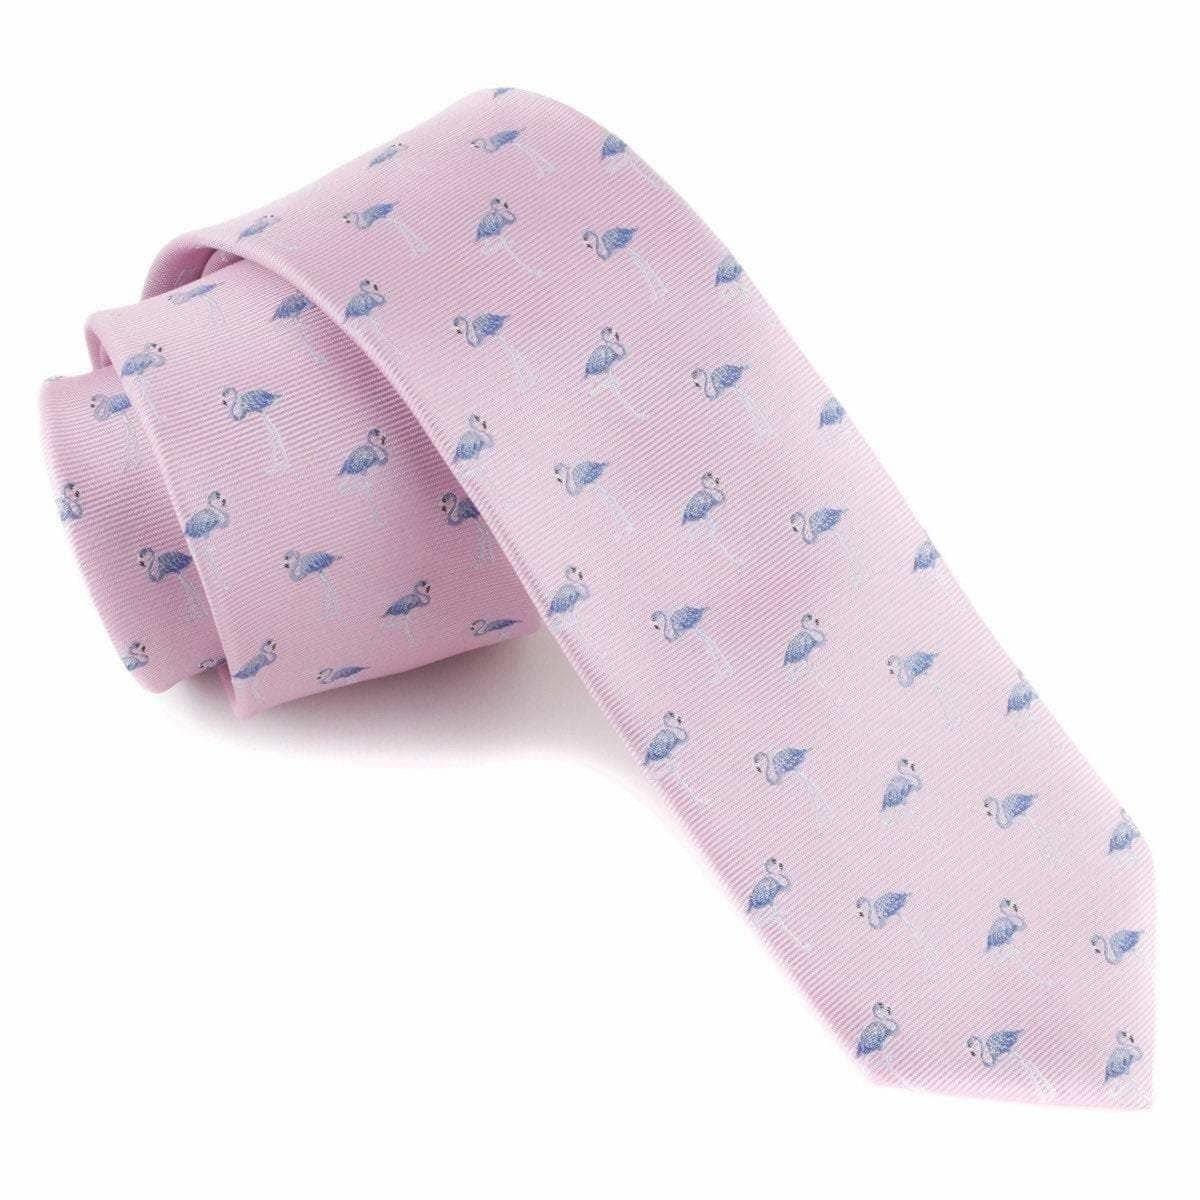 Flamingo Skinny Tie 2.36 LEAH-Neckties-Flamingo Skinny Tie Men’s Floral Necktie for weddings and events, great for prom and anniversary gifts. Mens floral ties near me us ties-Mytieshop. Skinny ties for weddings anniversaries. Father of bride. Groomsmen. Cool skinny neckties for men. Neckwear for prom, missions and fancy events. Gift ideas for men. Anniversaries ideas. Wedding aesthetics. Flower ties. Dry flower ties.